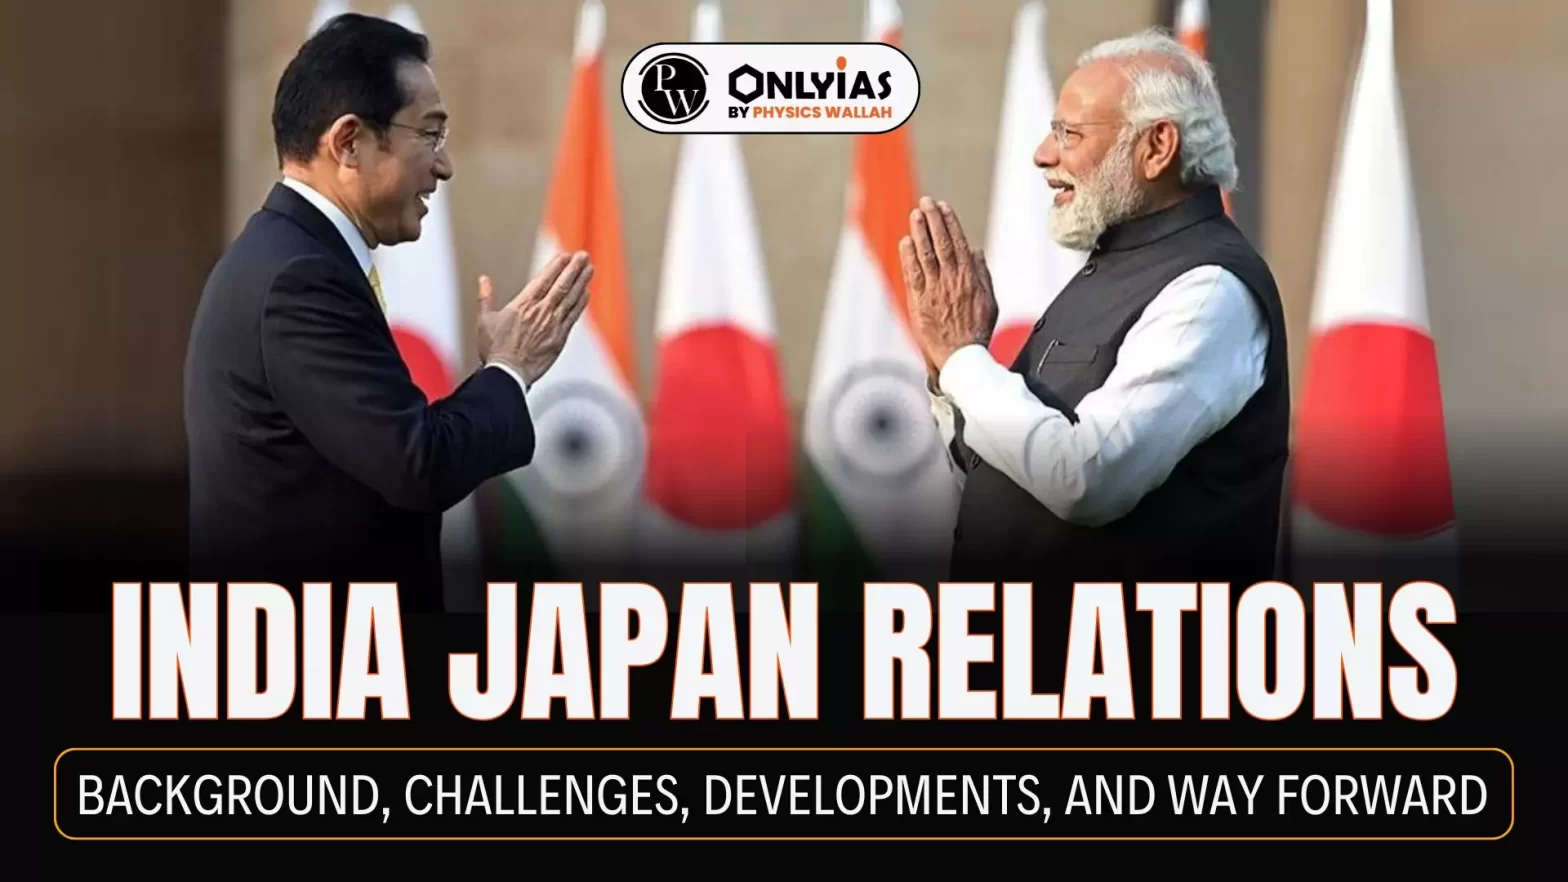 India Japan Relations: Background, Challenges, Developments, and Way Forward